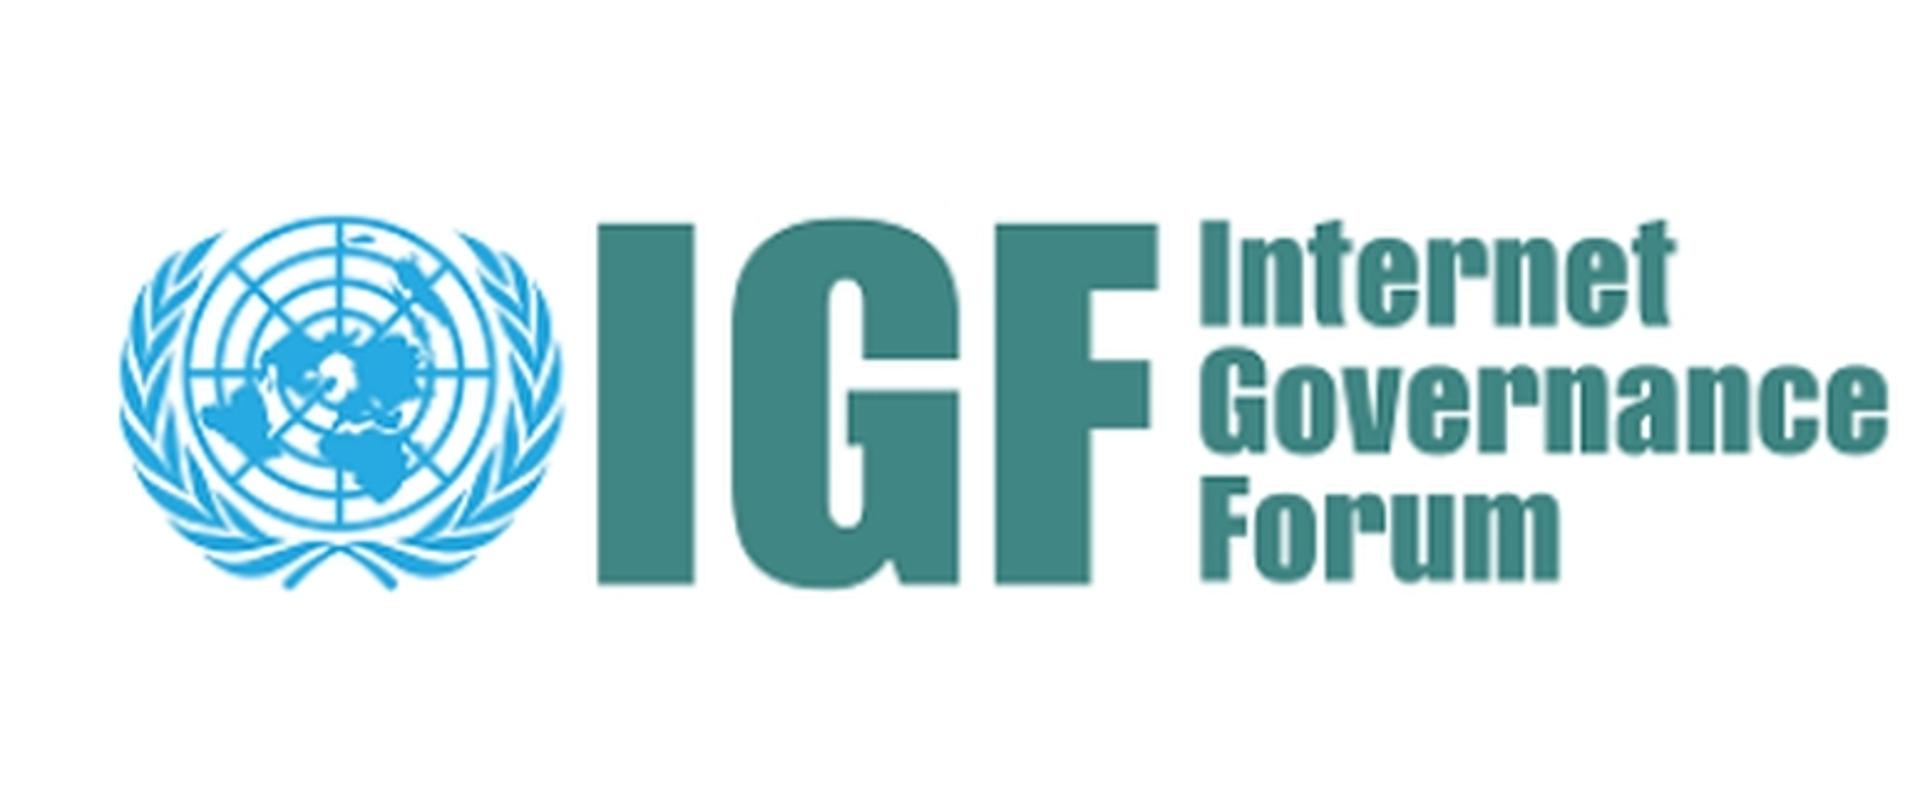 The photo shows the UN logotype with the inscription IGF - Internet Governance Forum